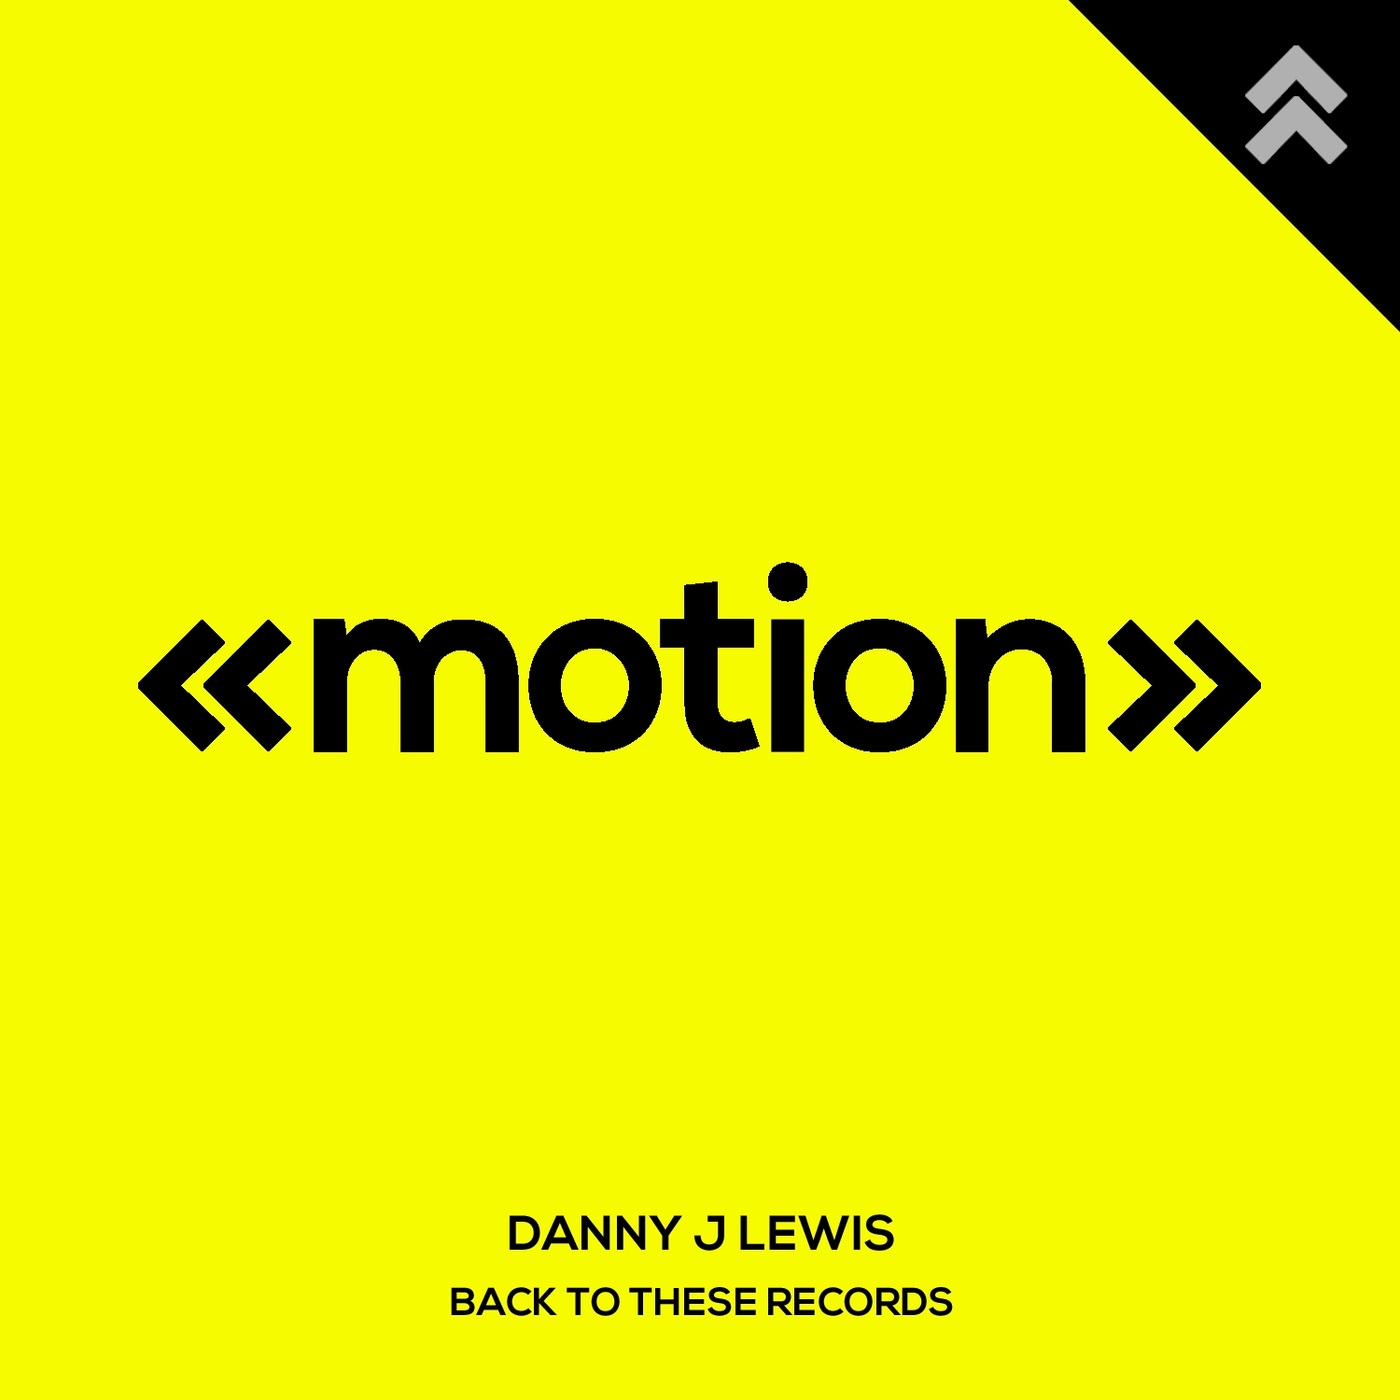 Danny J Lewis - Back to These Records / motion